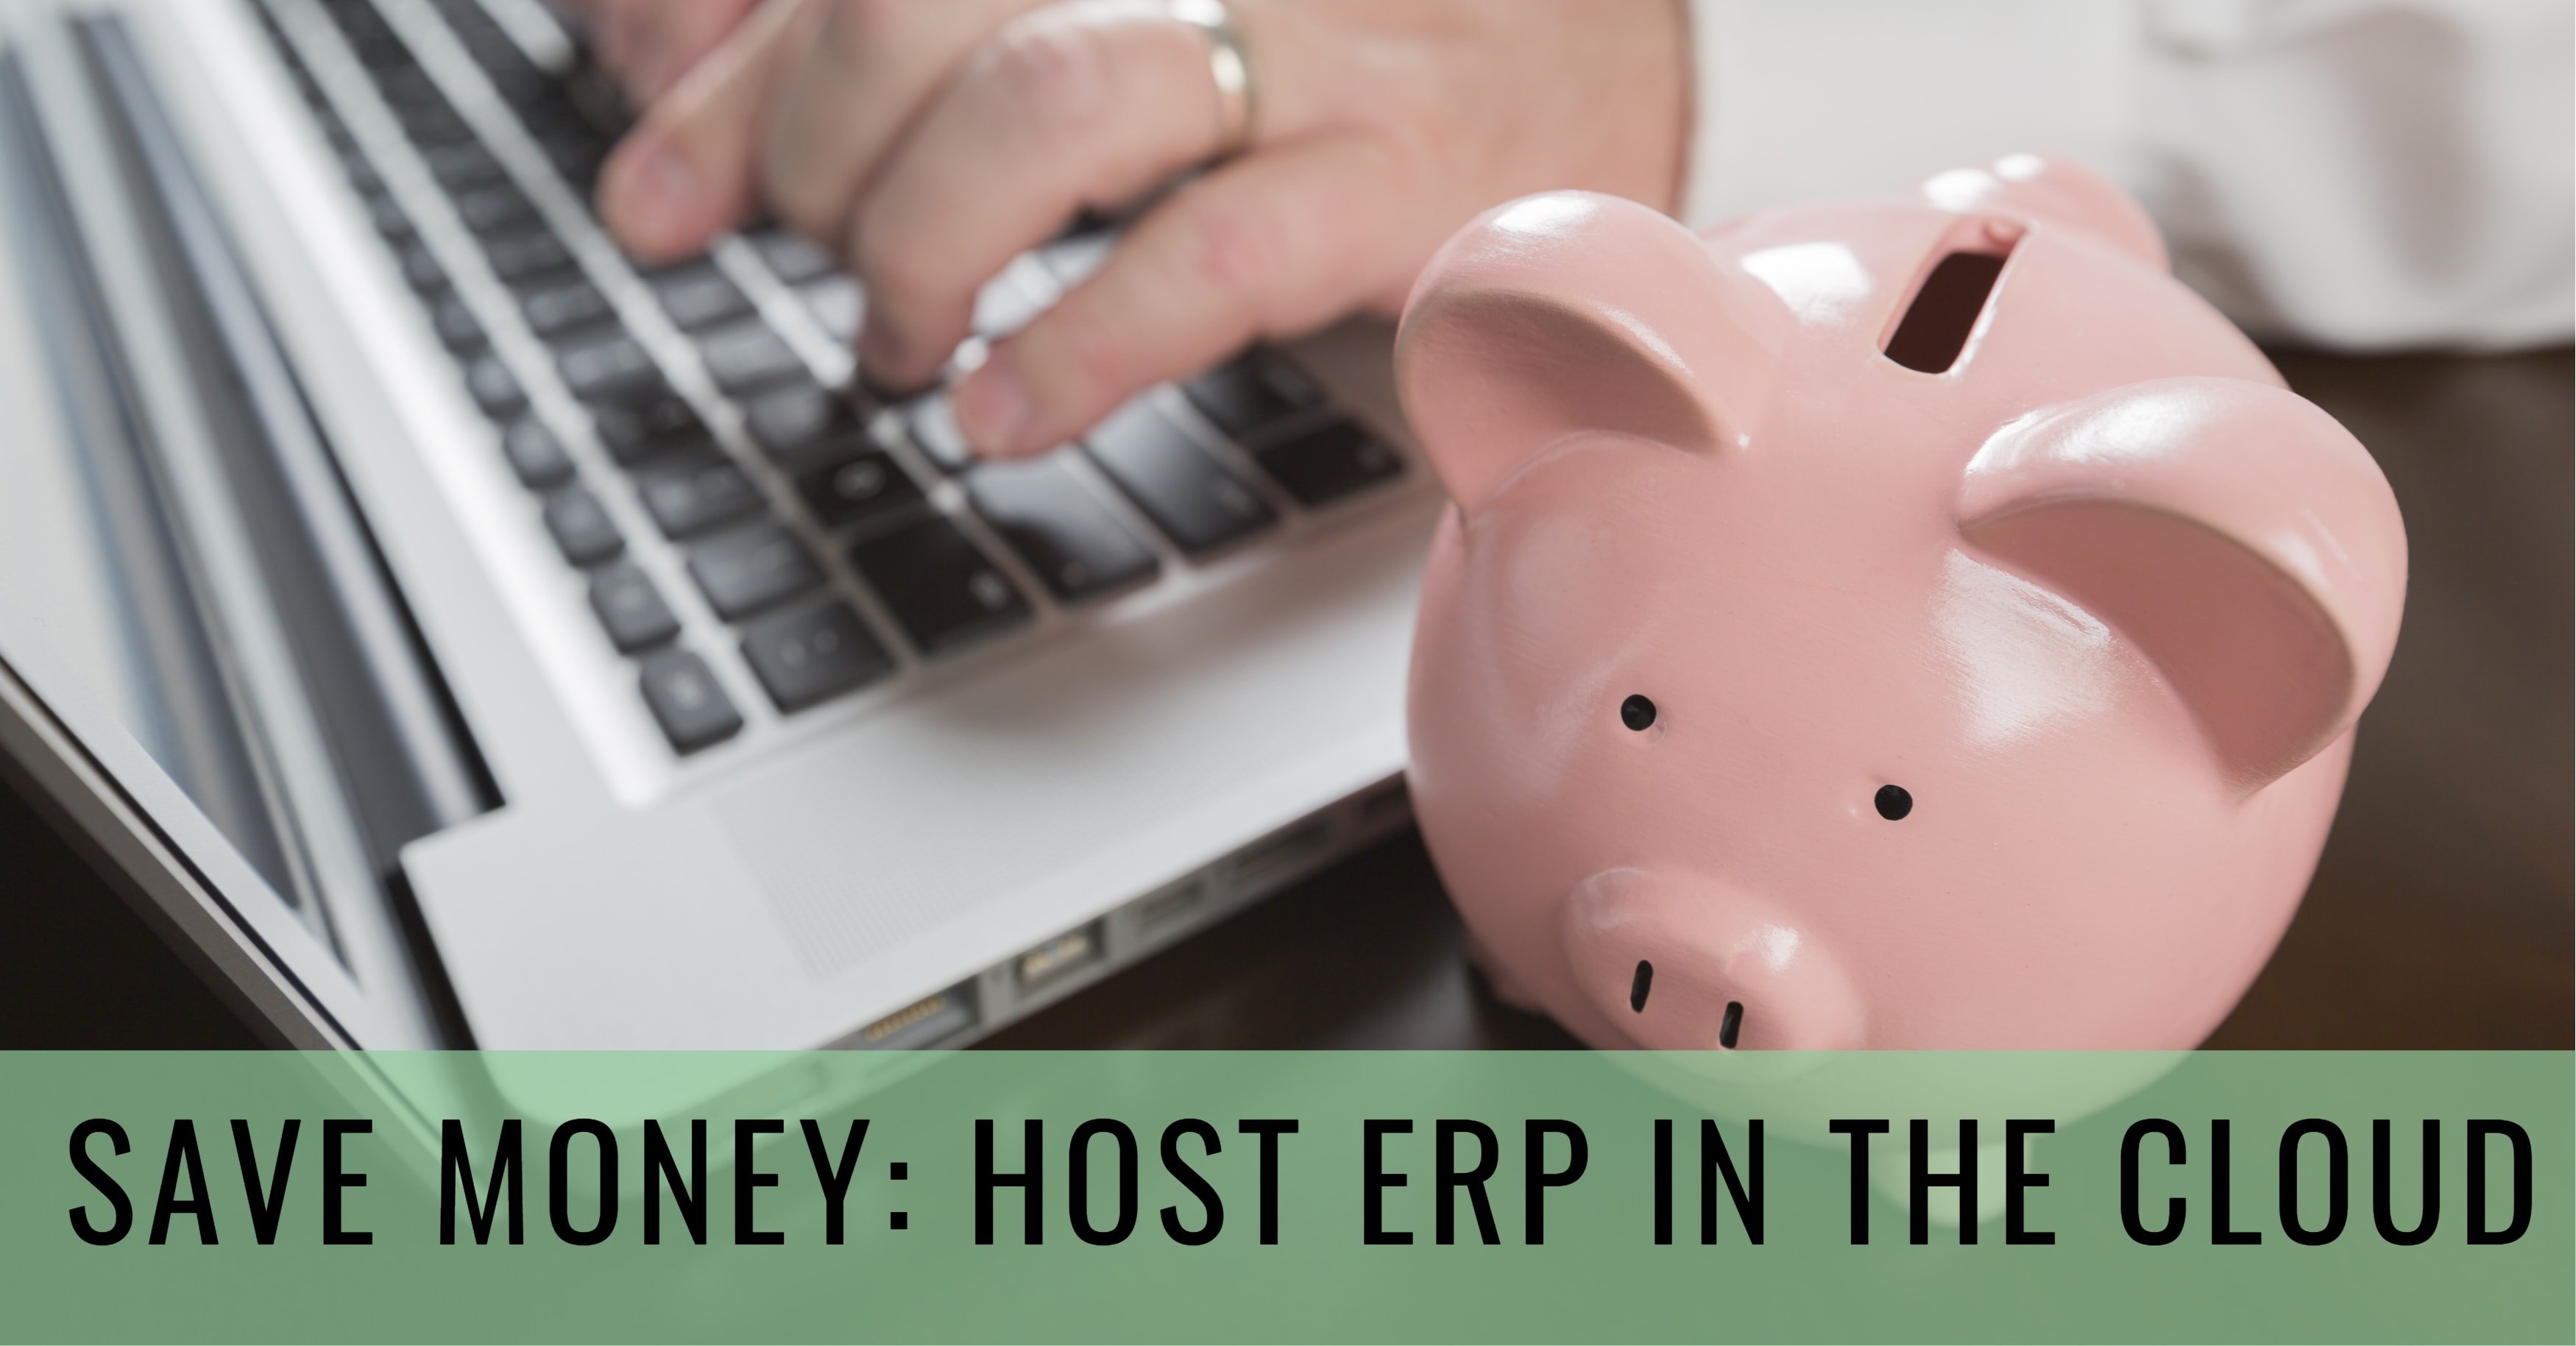 Save Money by Hosting ERP in the Cloud